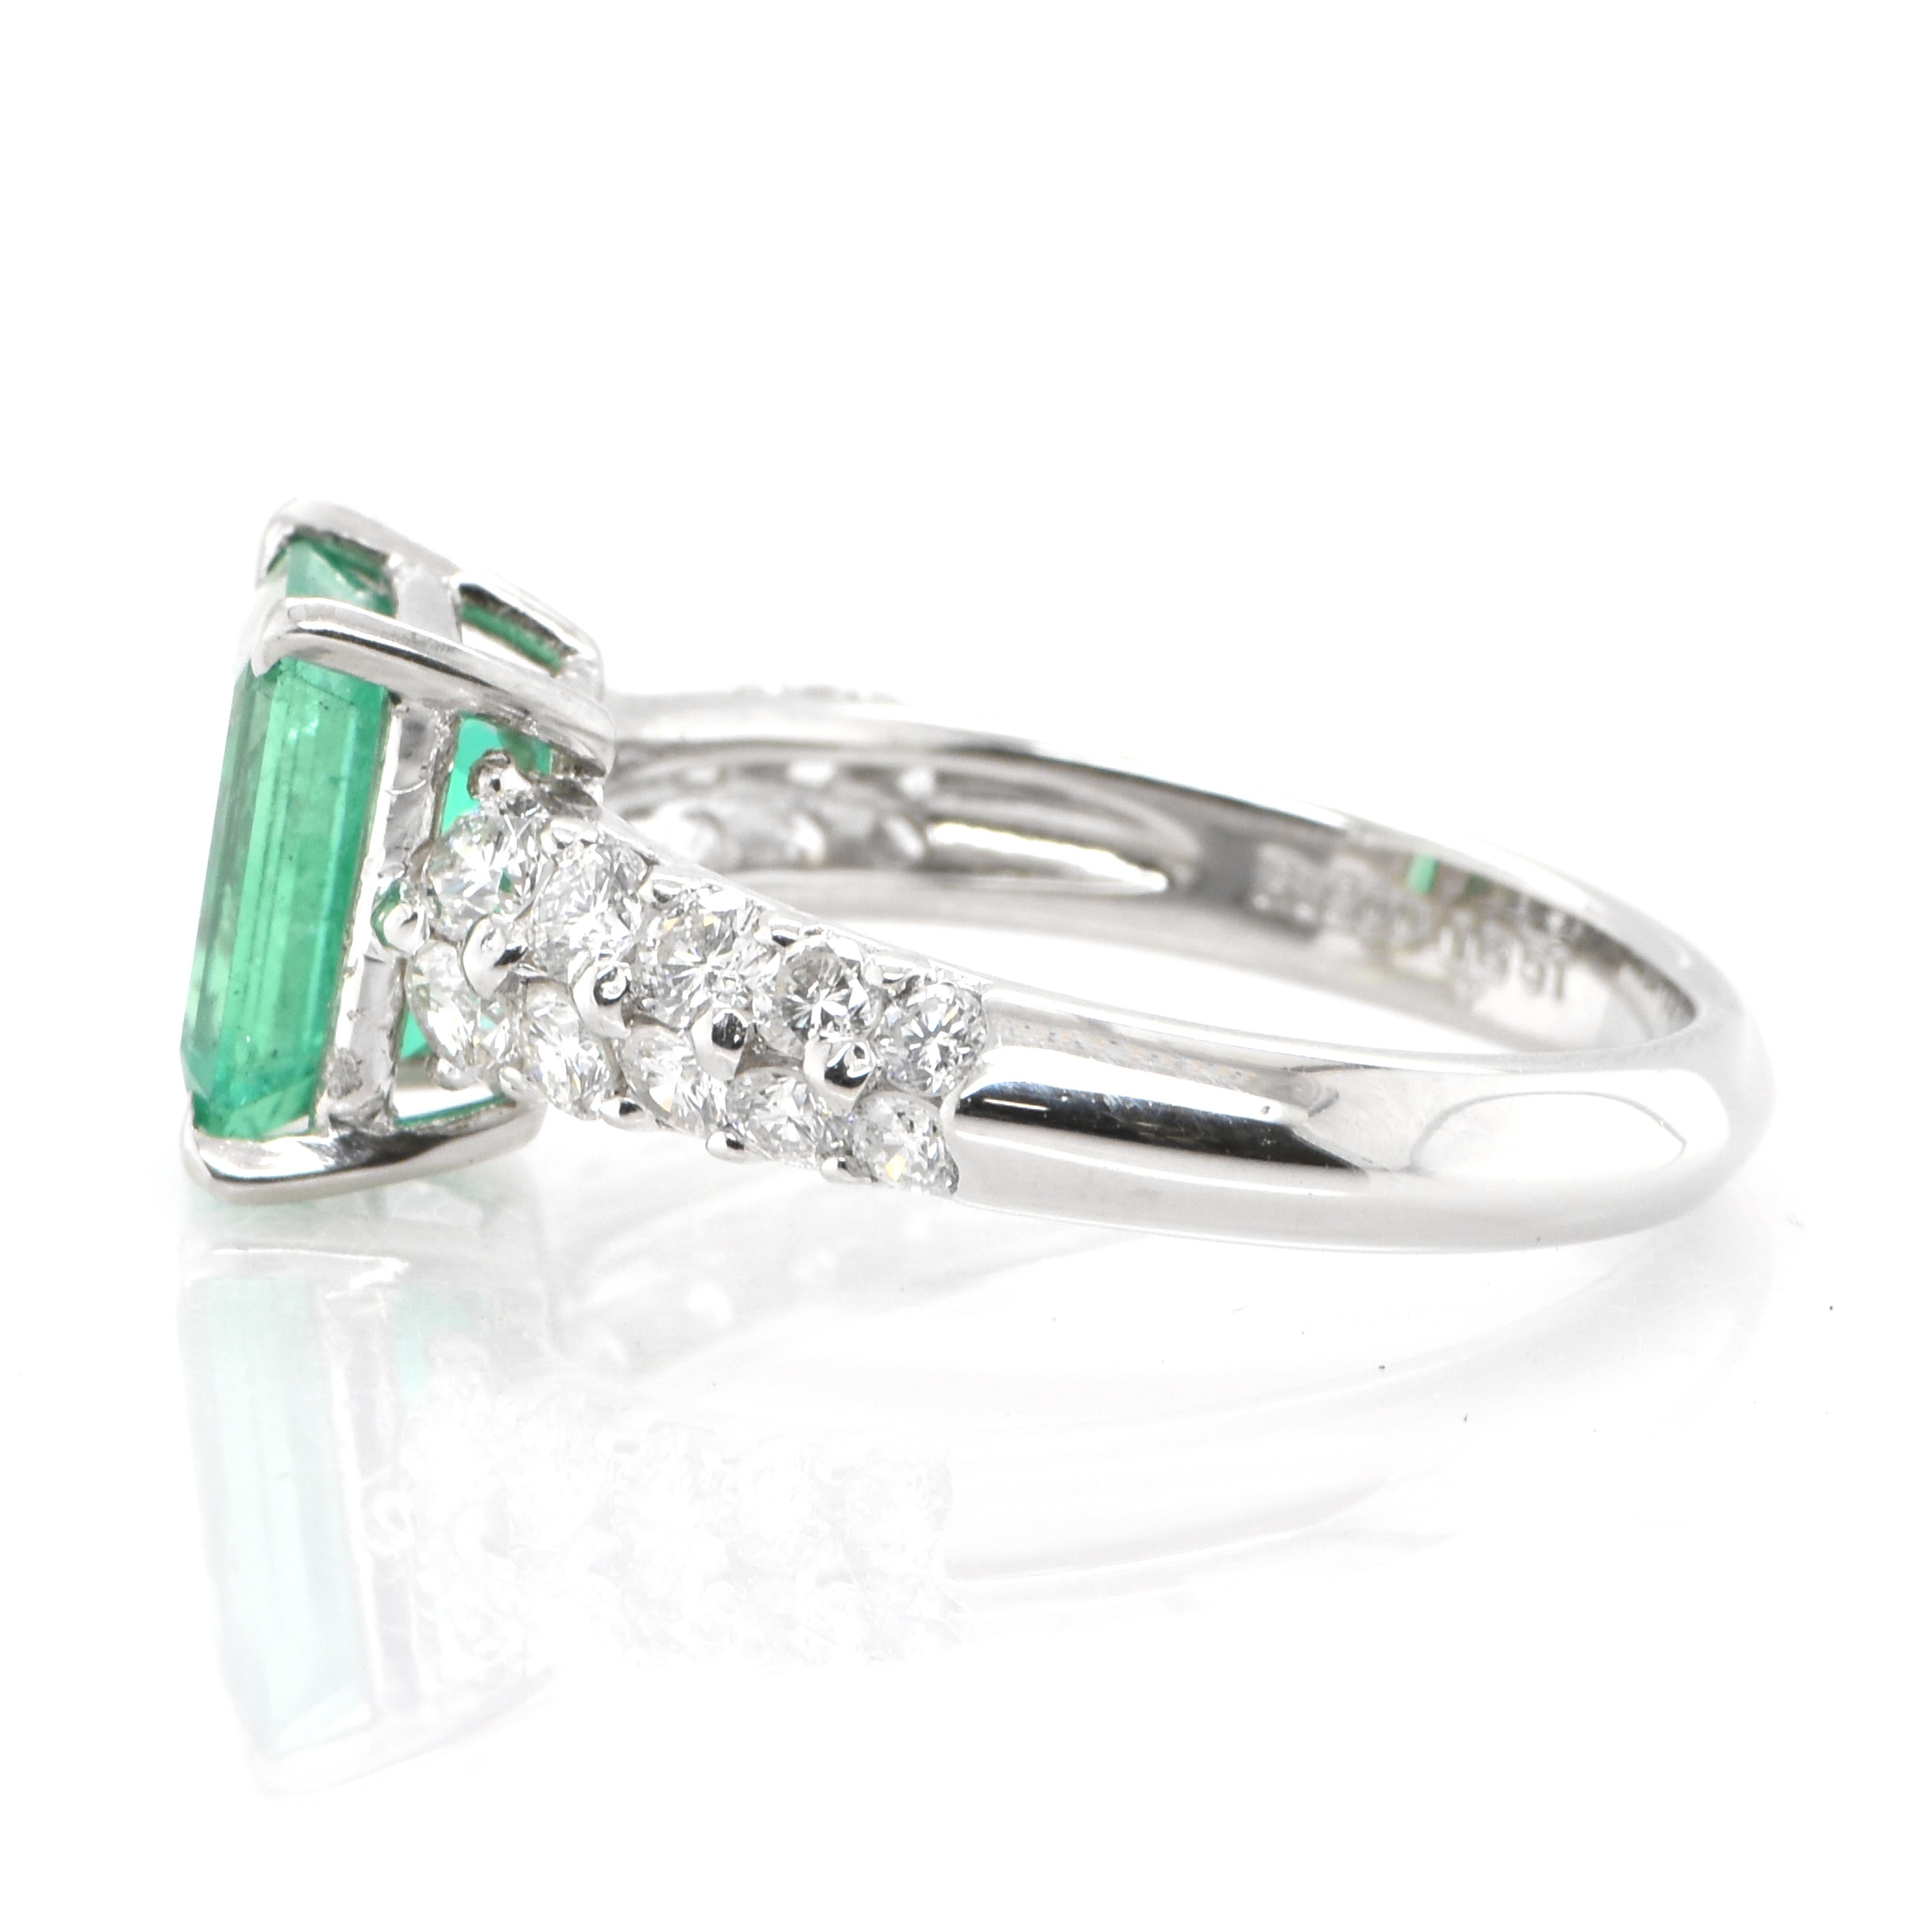 Emerald Cut 1.65 Carat Natural Colombian Emerald and Diamond Ring Set in Platinum